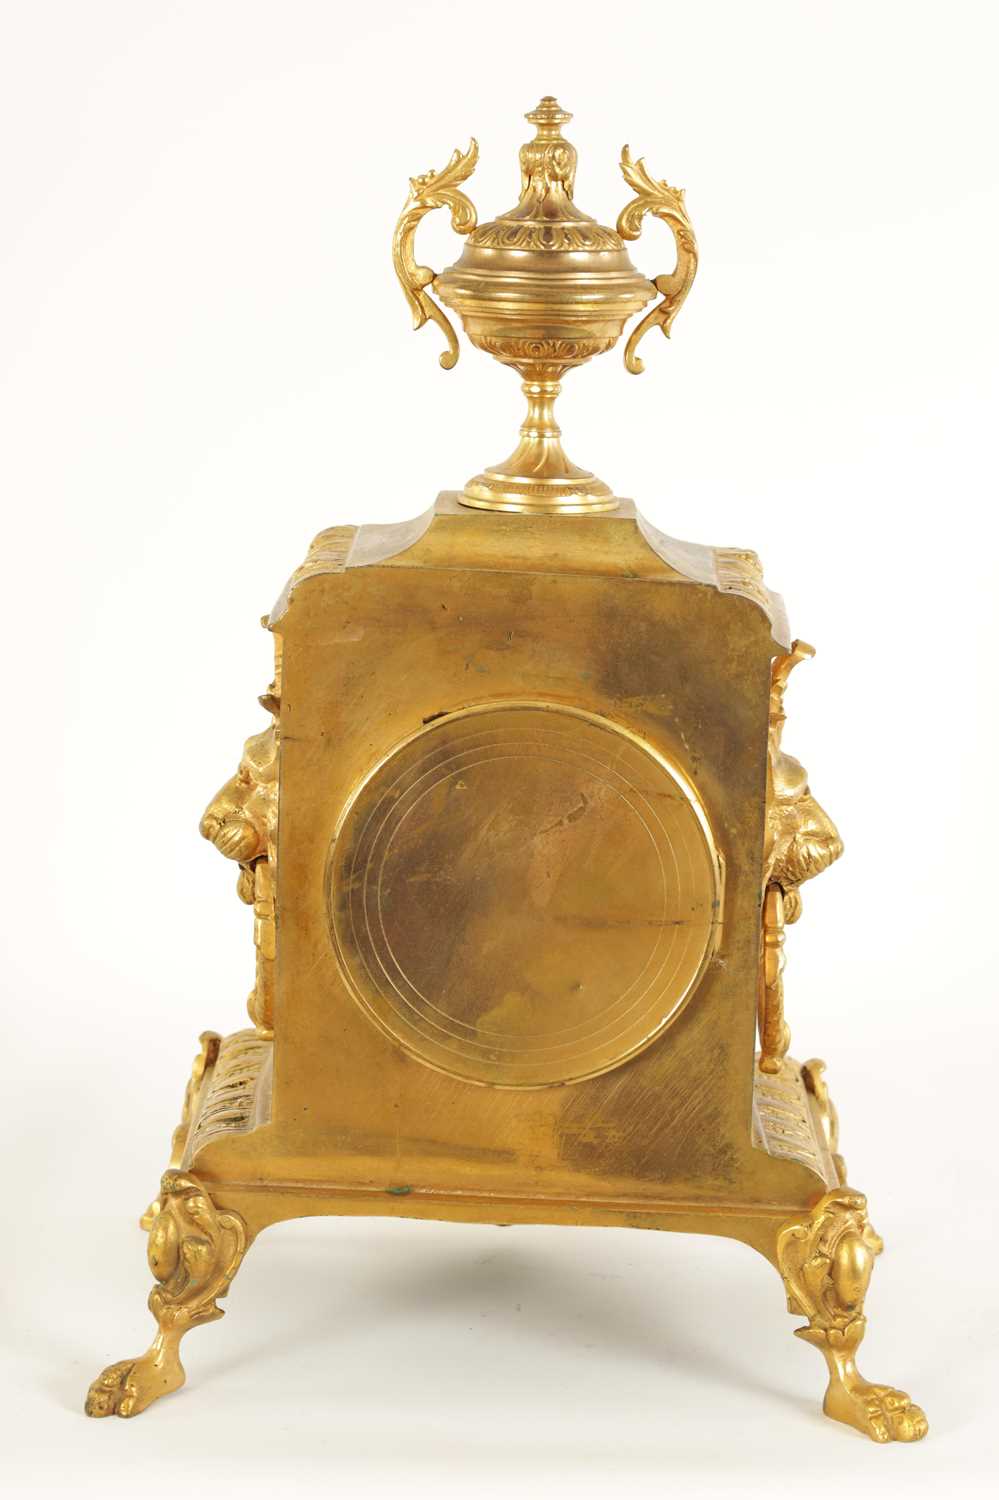 RICHOND. A LATE 19TH CENTURY FRENCH ORMOLU MANTEL CLOCK - Image 8 of 9